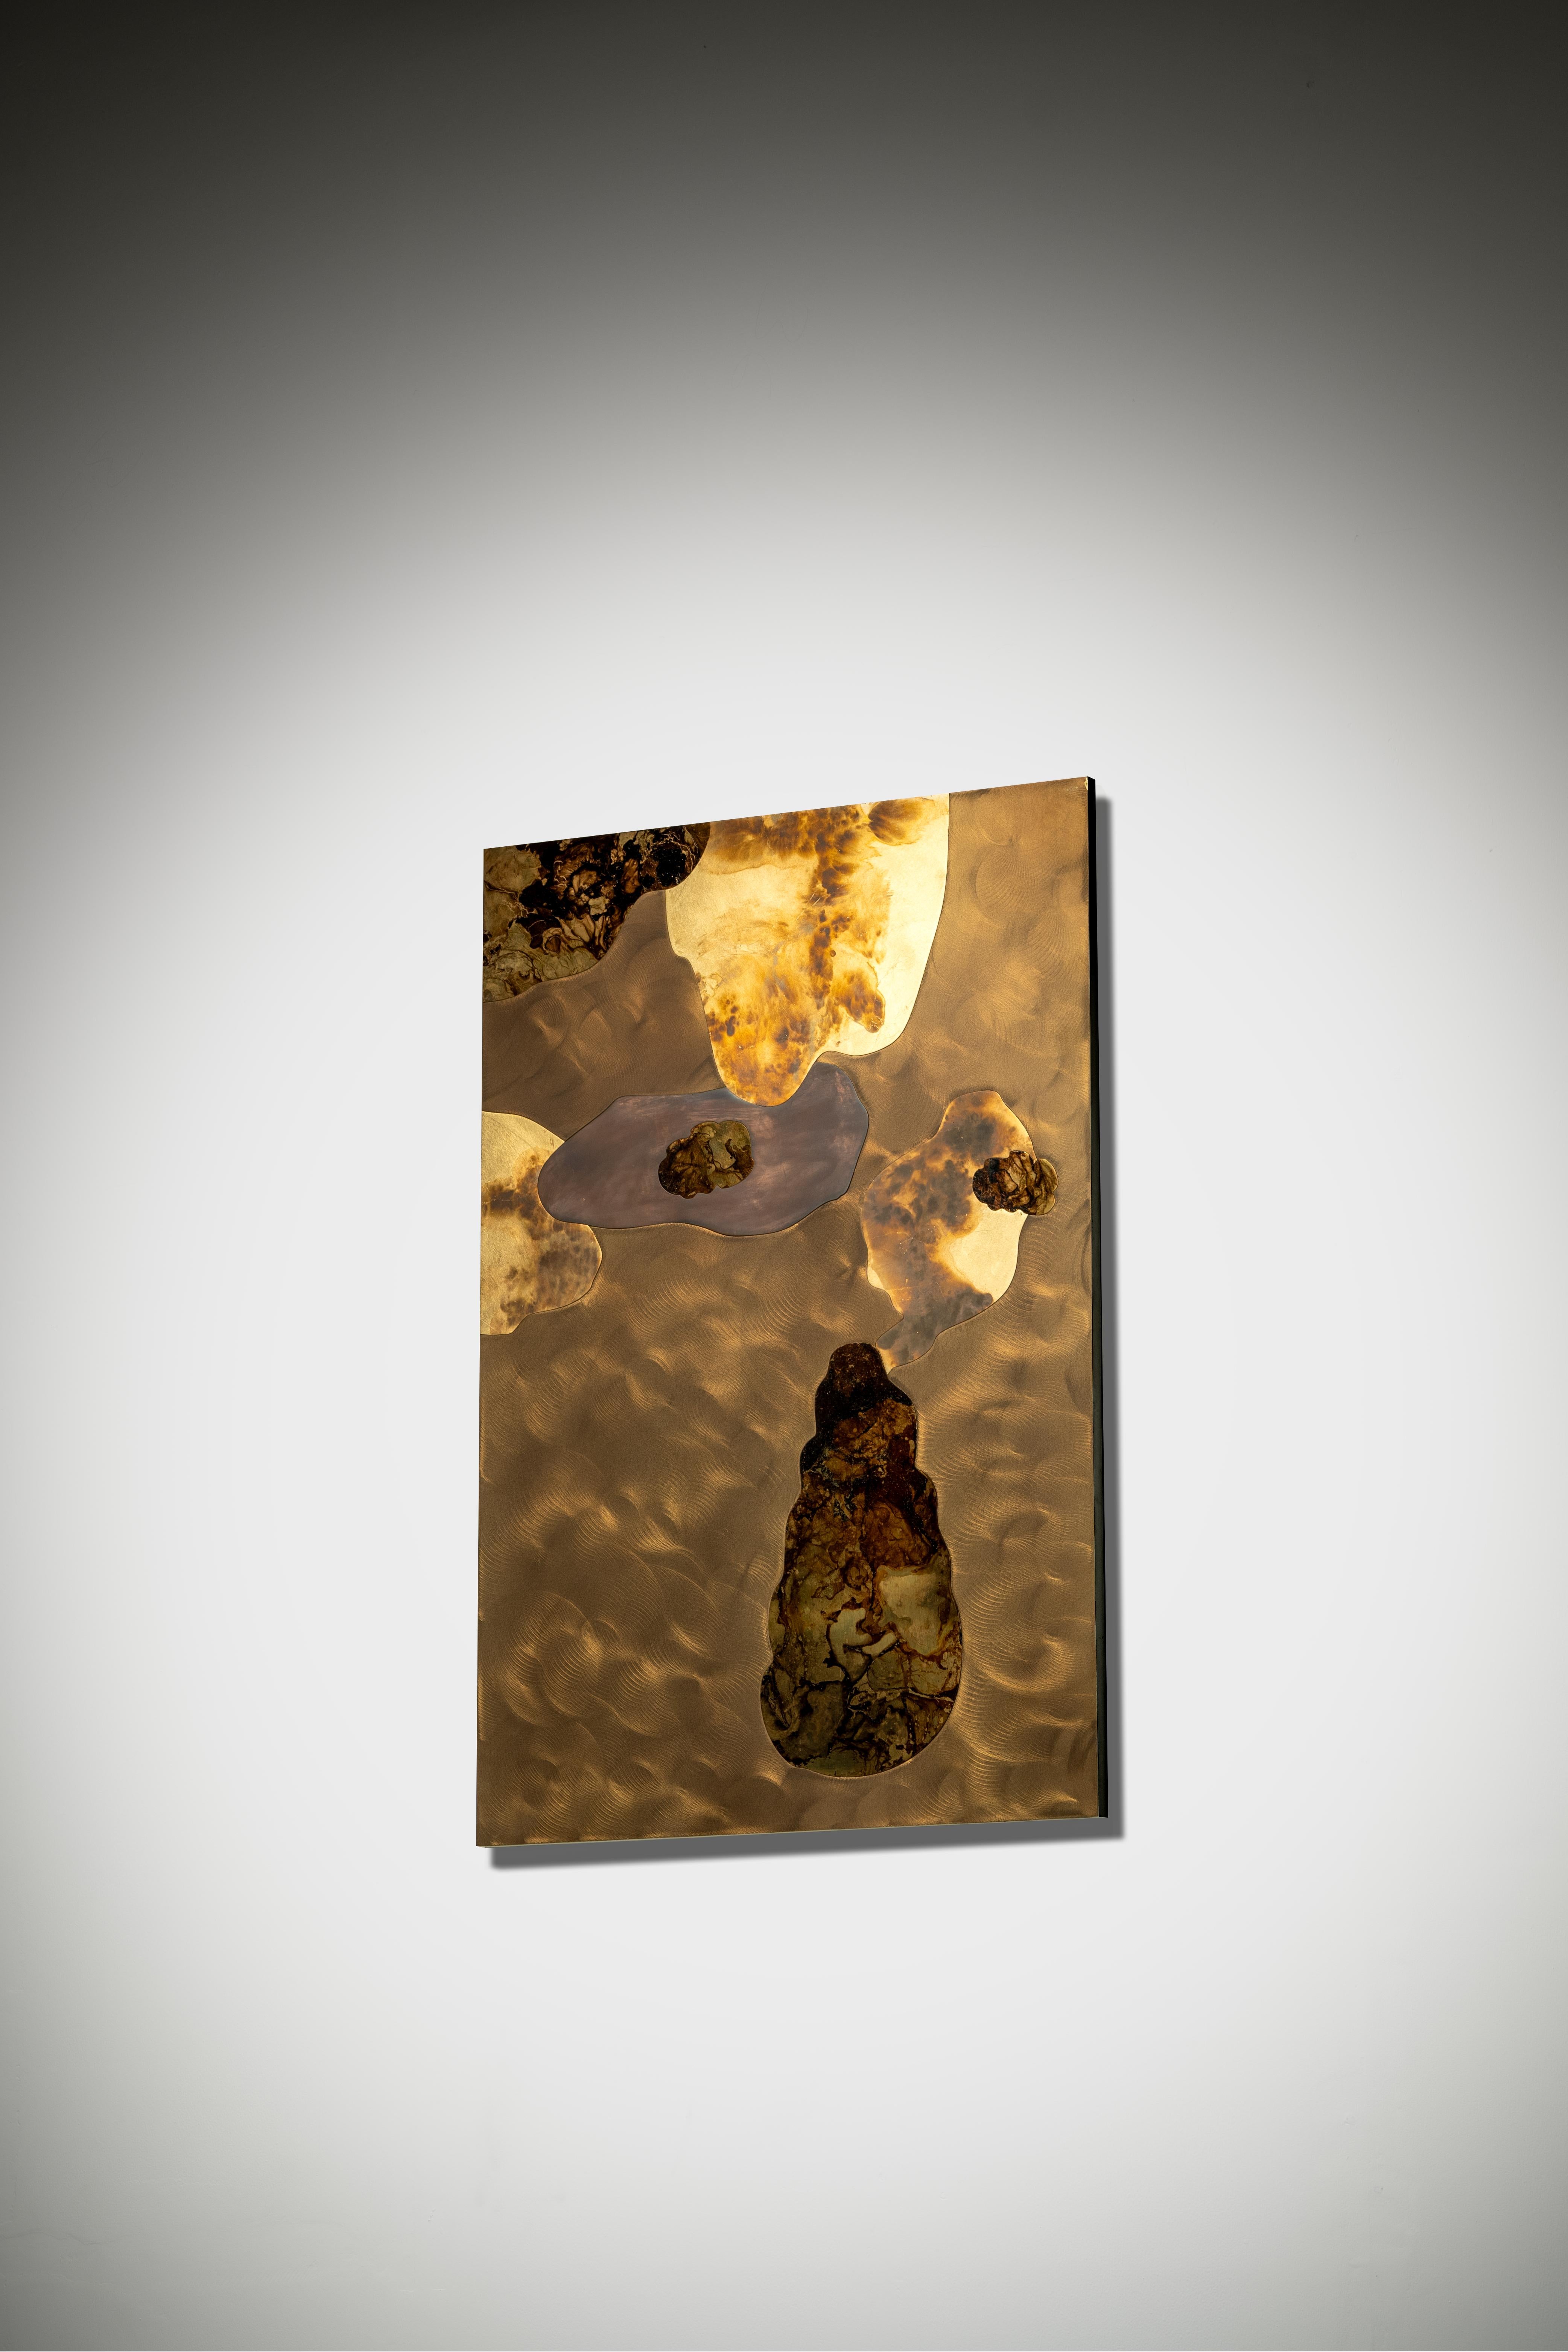 Wandering nebula in endless seas of gold dust with planetary forms making their way to unknown destinations. Art for your souls in precious metals and fine craftsmanship.
The wall art is made with meticulous marquetry of metal, hand lacquered to